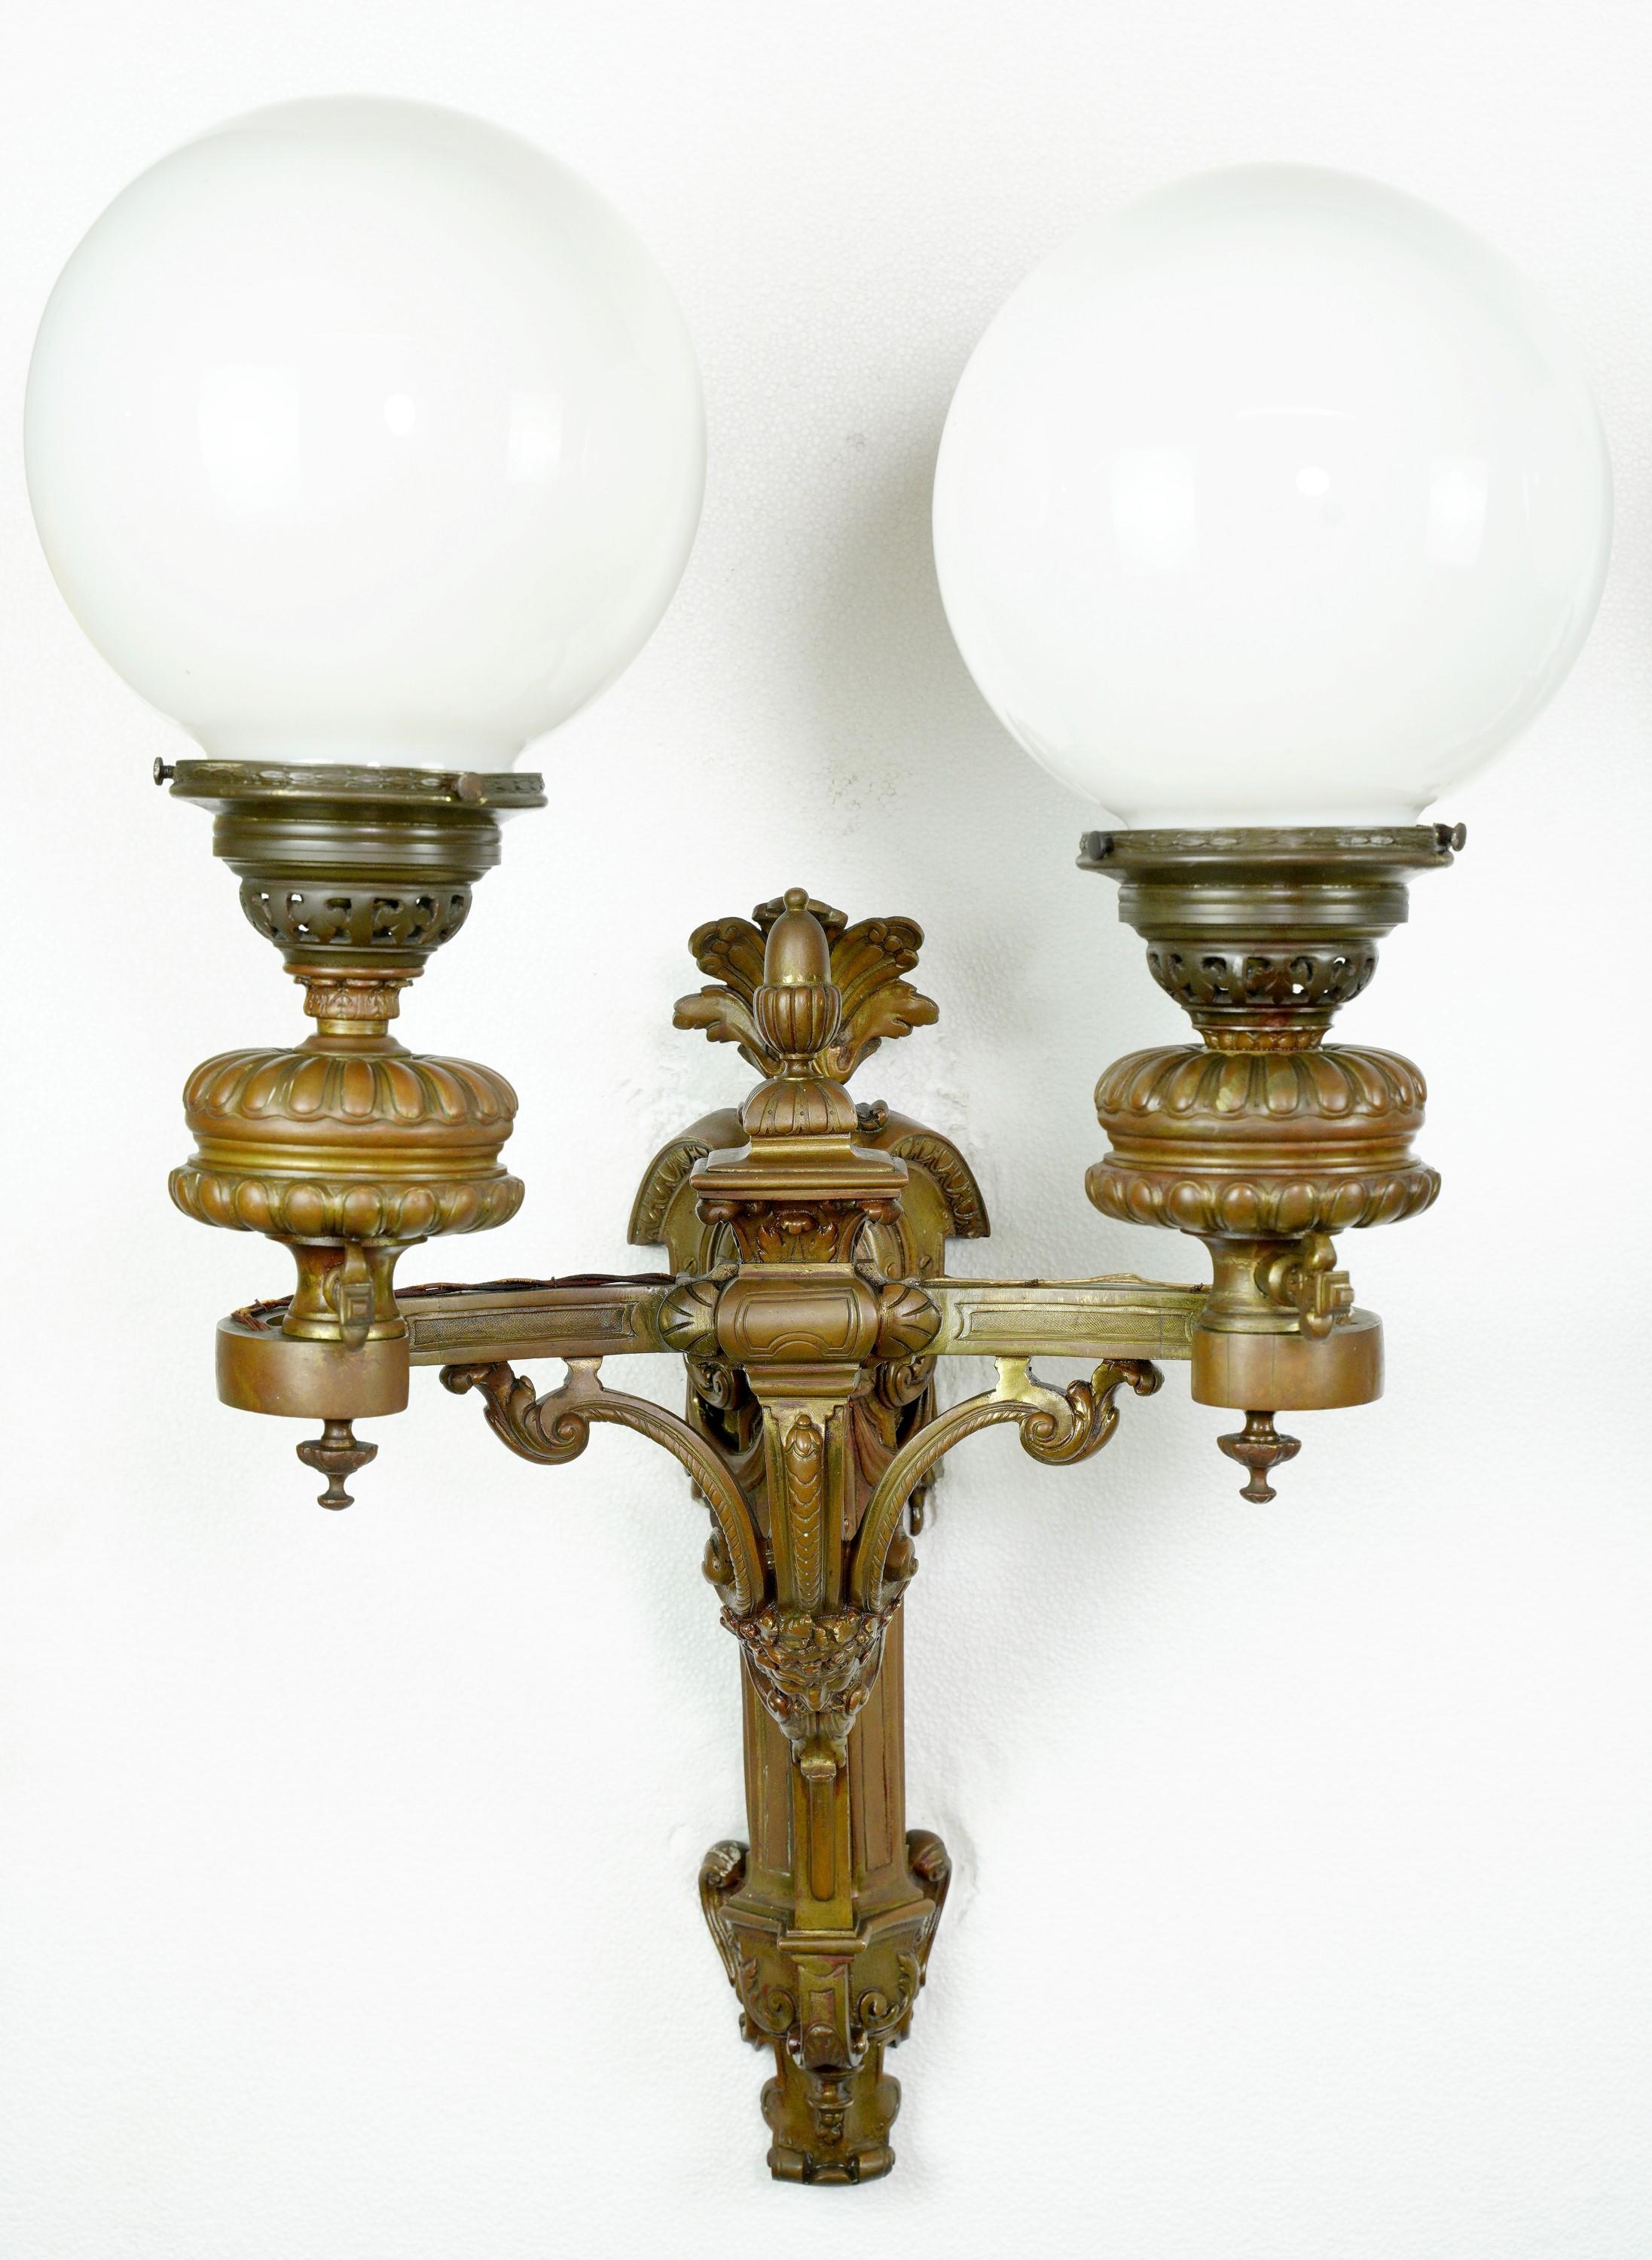 Early 20th Century pair of bronze antique two arm sconces with milk glass spherical globe shades and featuring standard sockets. Cleaned and restored. One of the two sconces has a slightly different lower base. Please see images. Priced as pair.